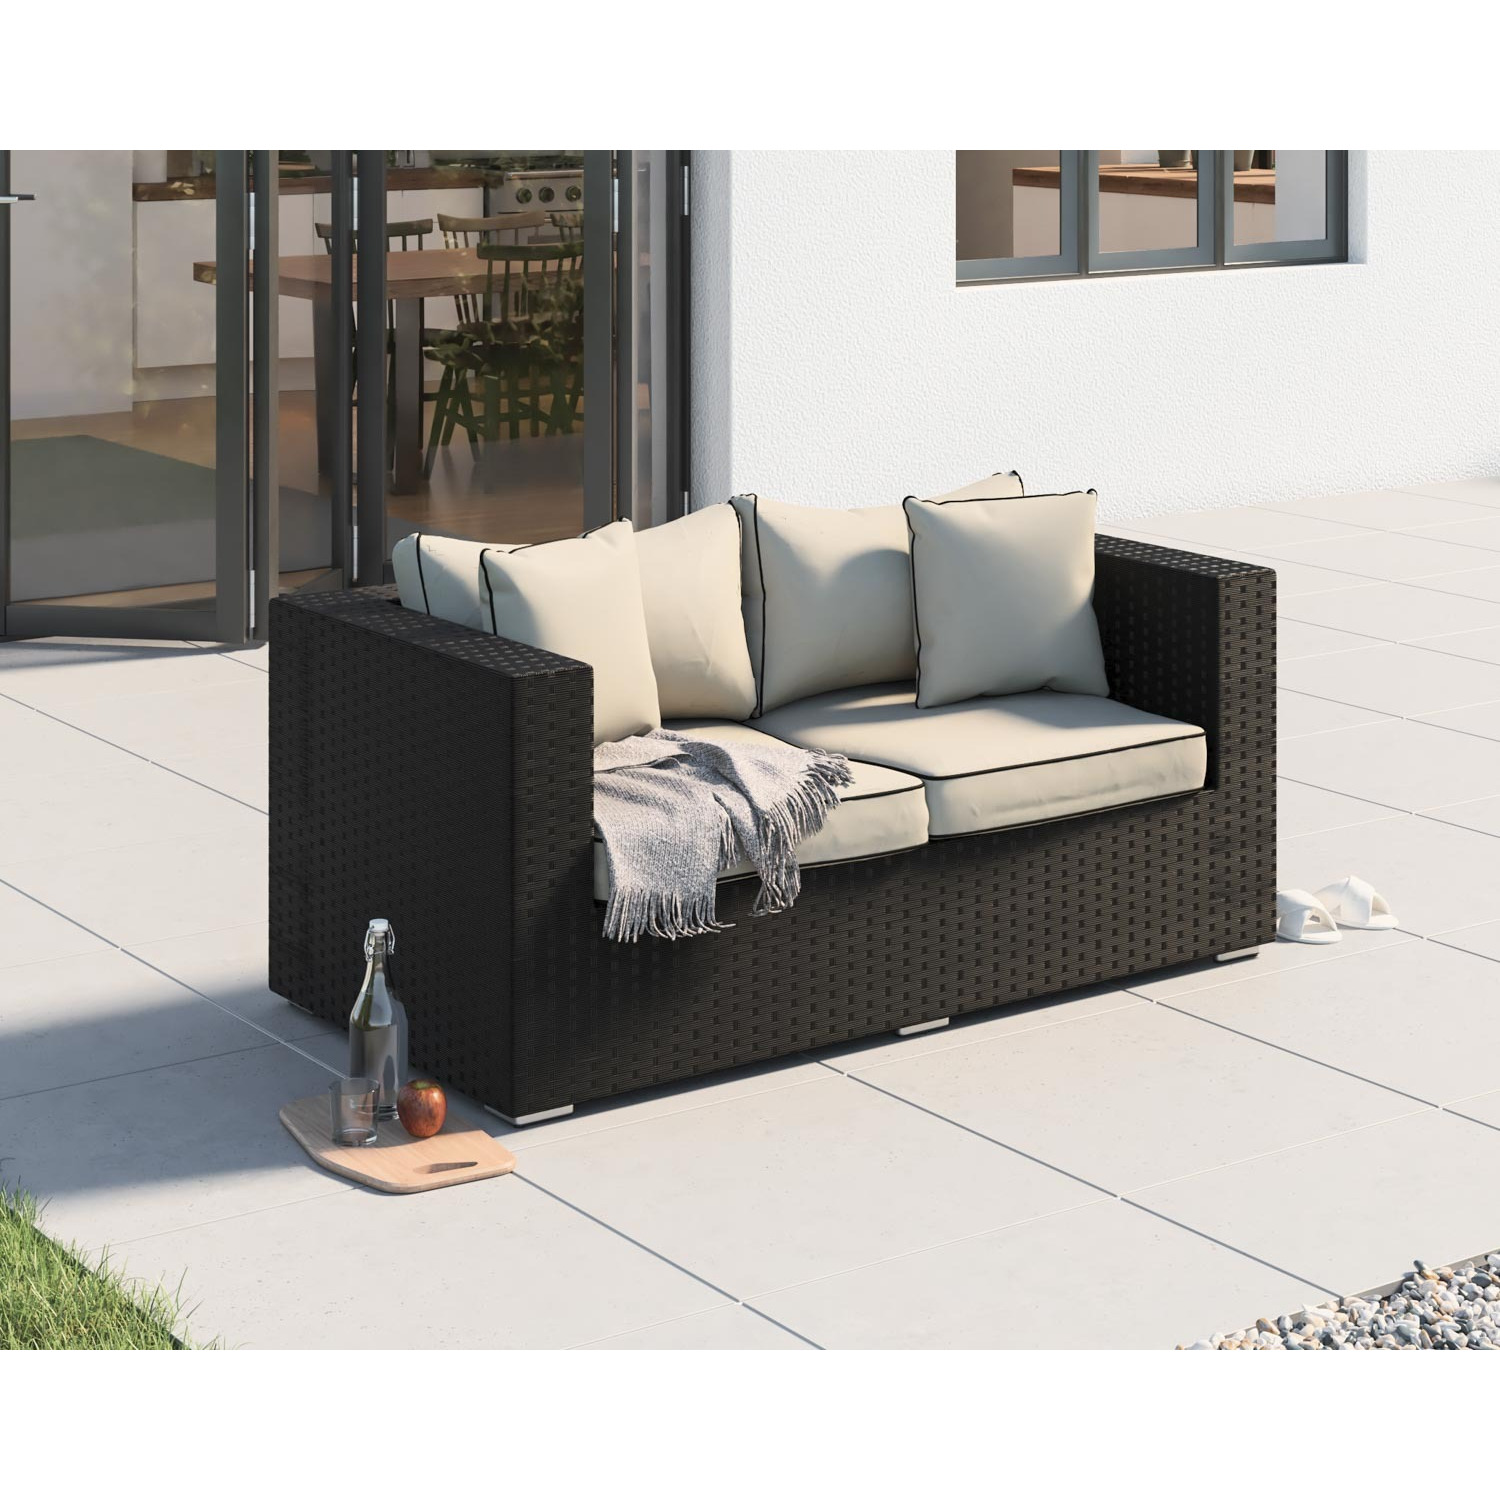 2 Seater Rattan Garden Sofa in Black With White Cushions - Ascot - Rattan Direct